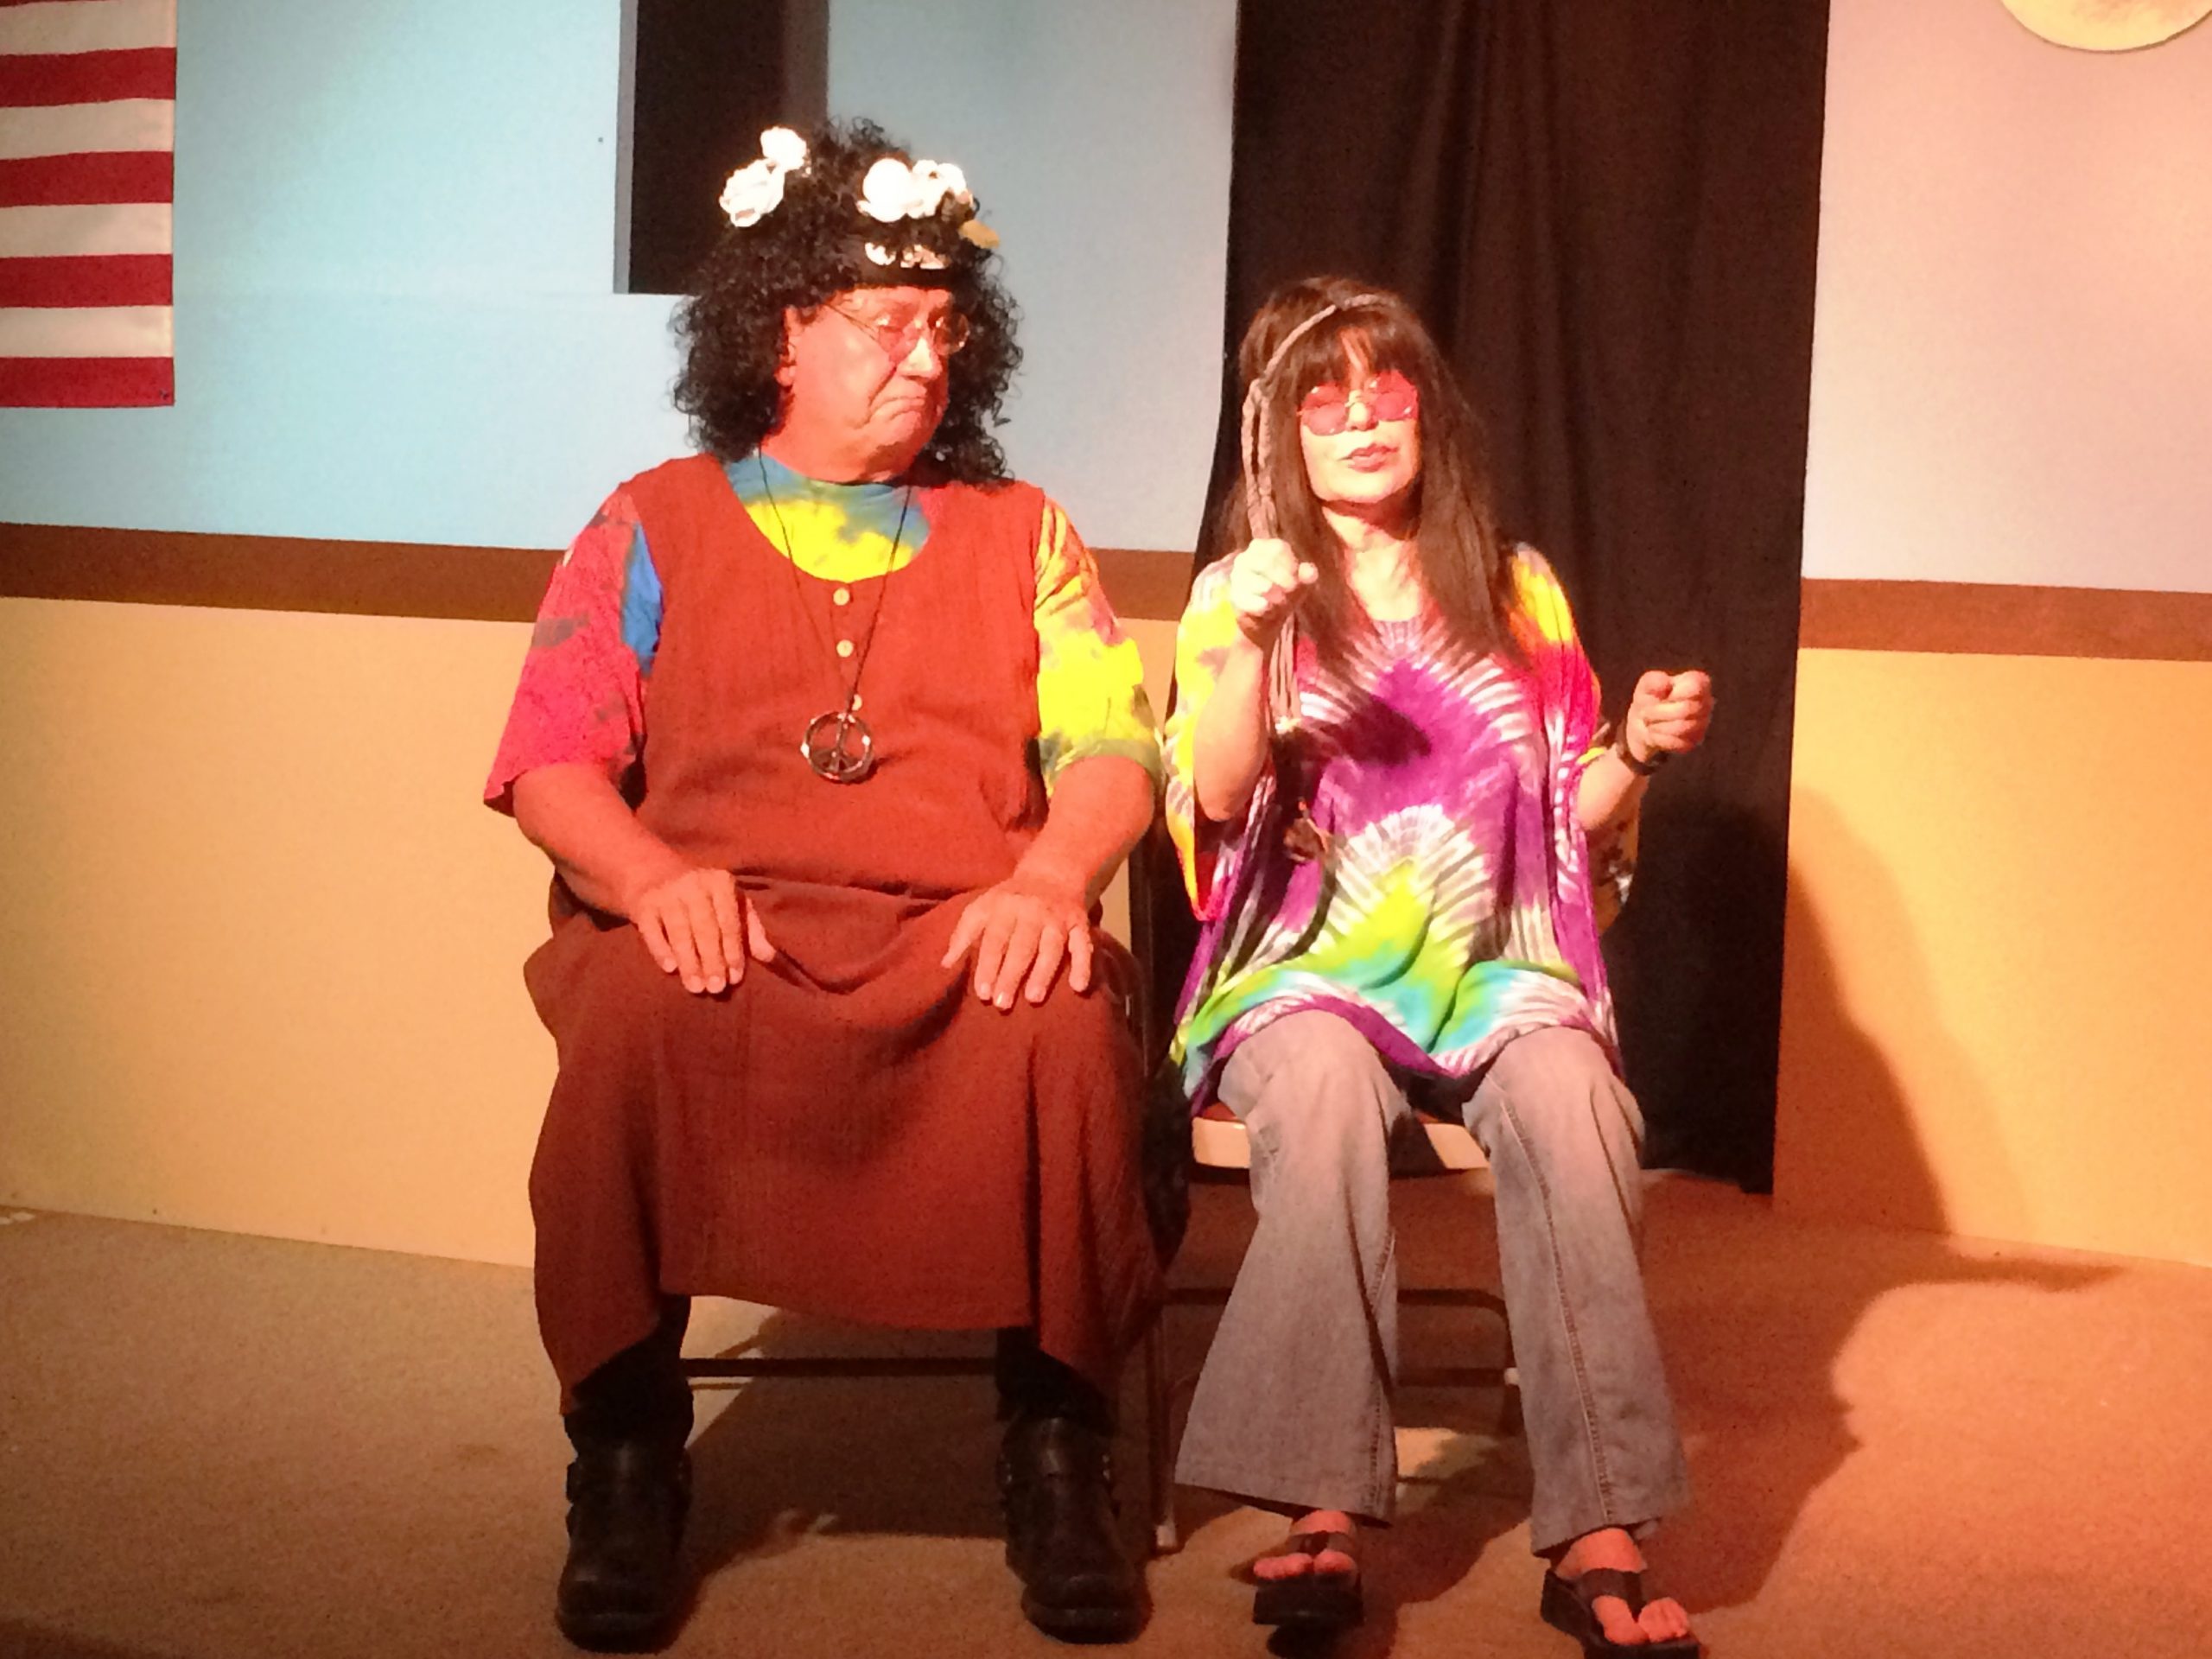 A male actor wearing a funny hat sits next to a female actor wearing a tie-dyed shirt, wide legged pants, and sunglasses